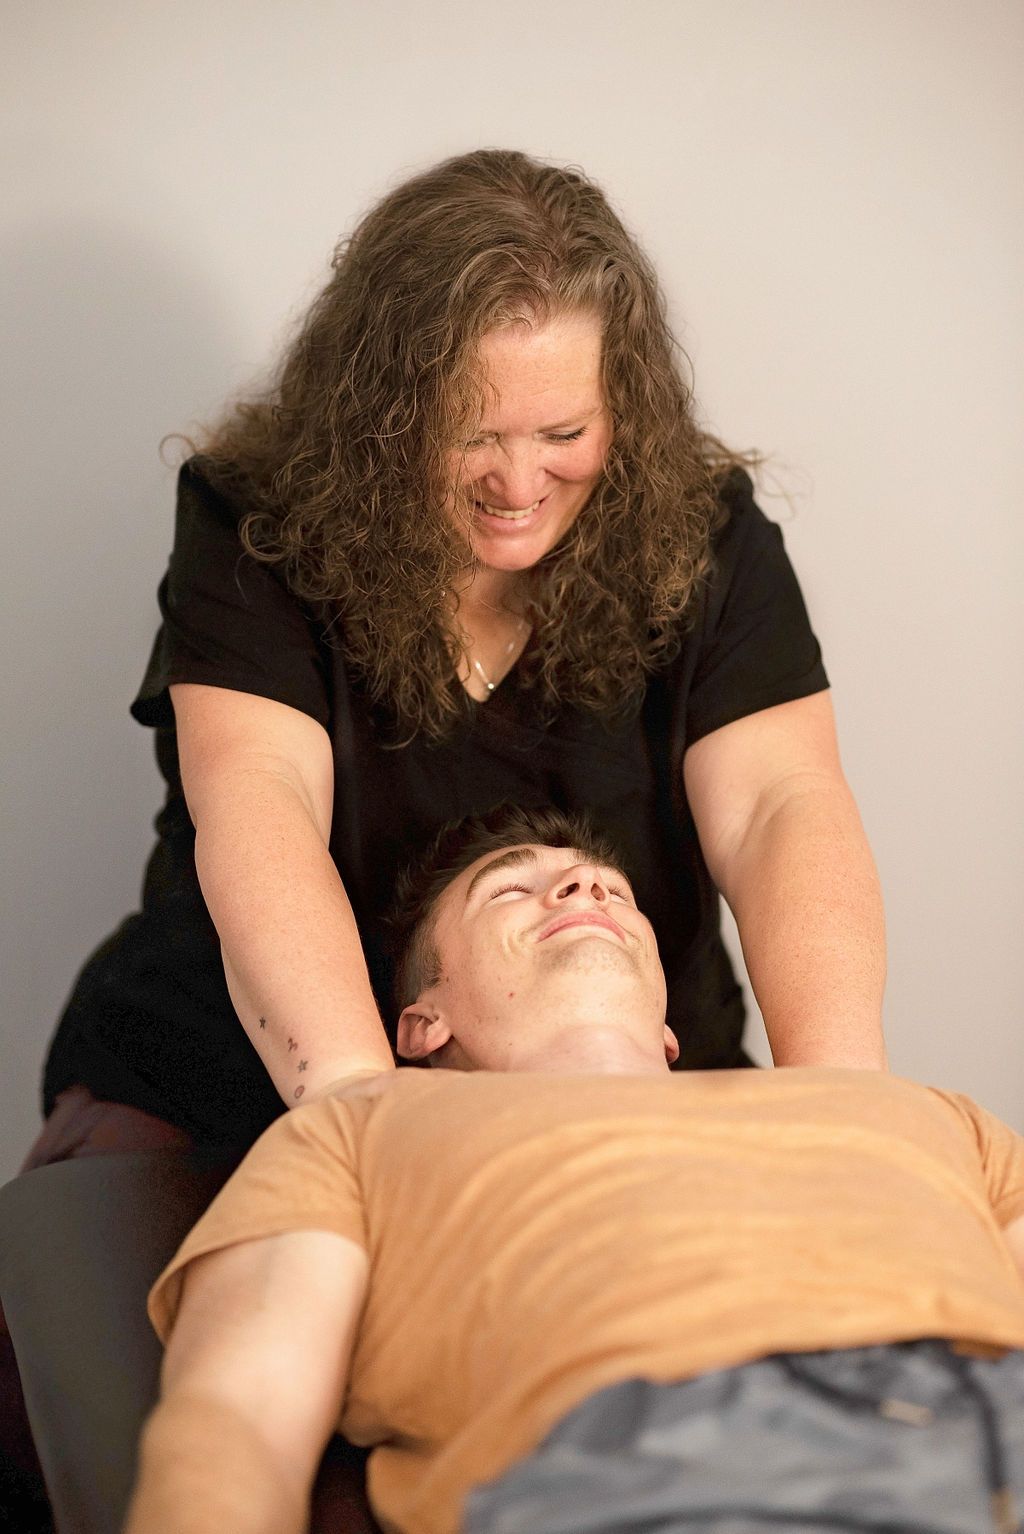 a woman is smiling while giving a man a massage